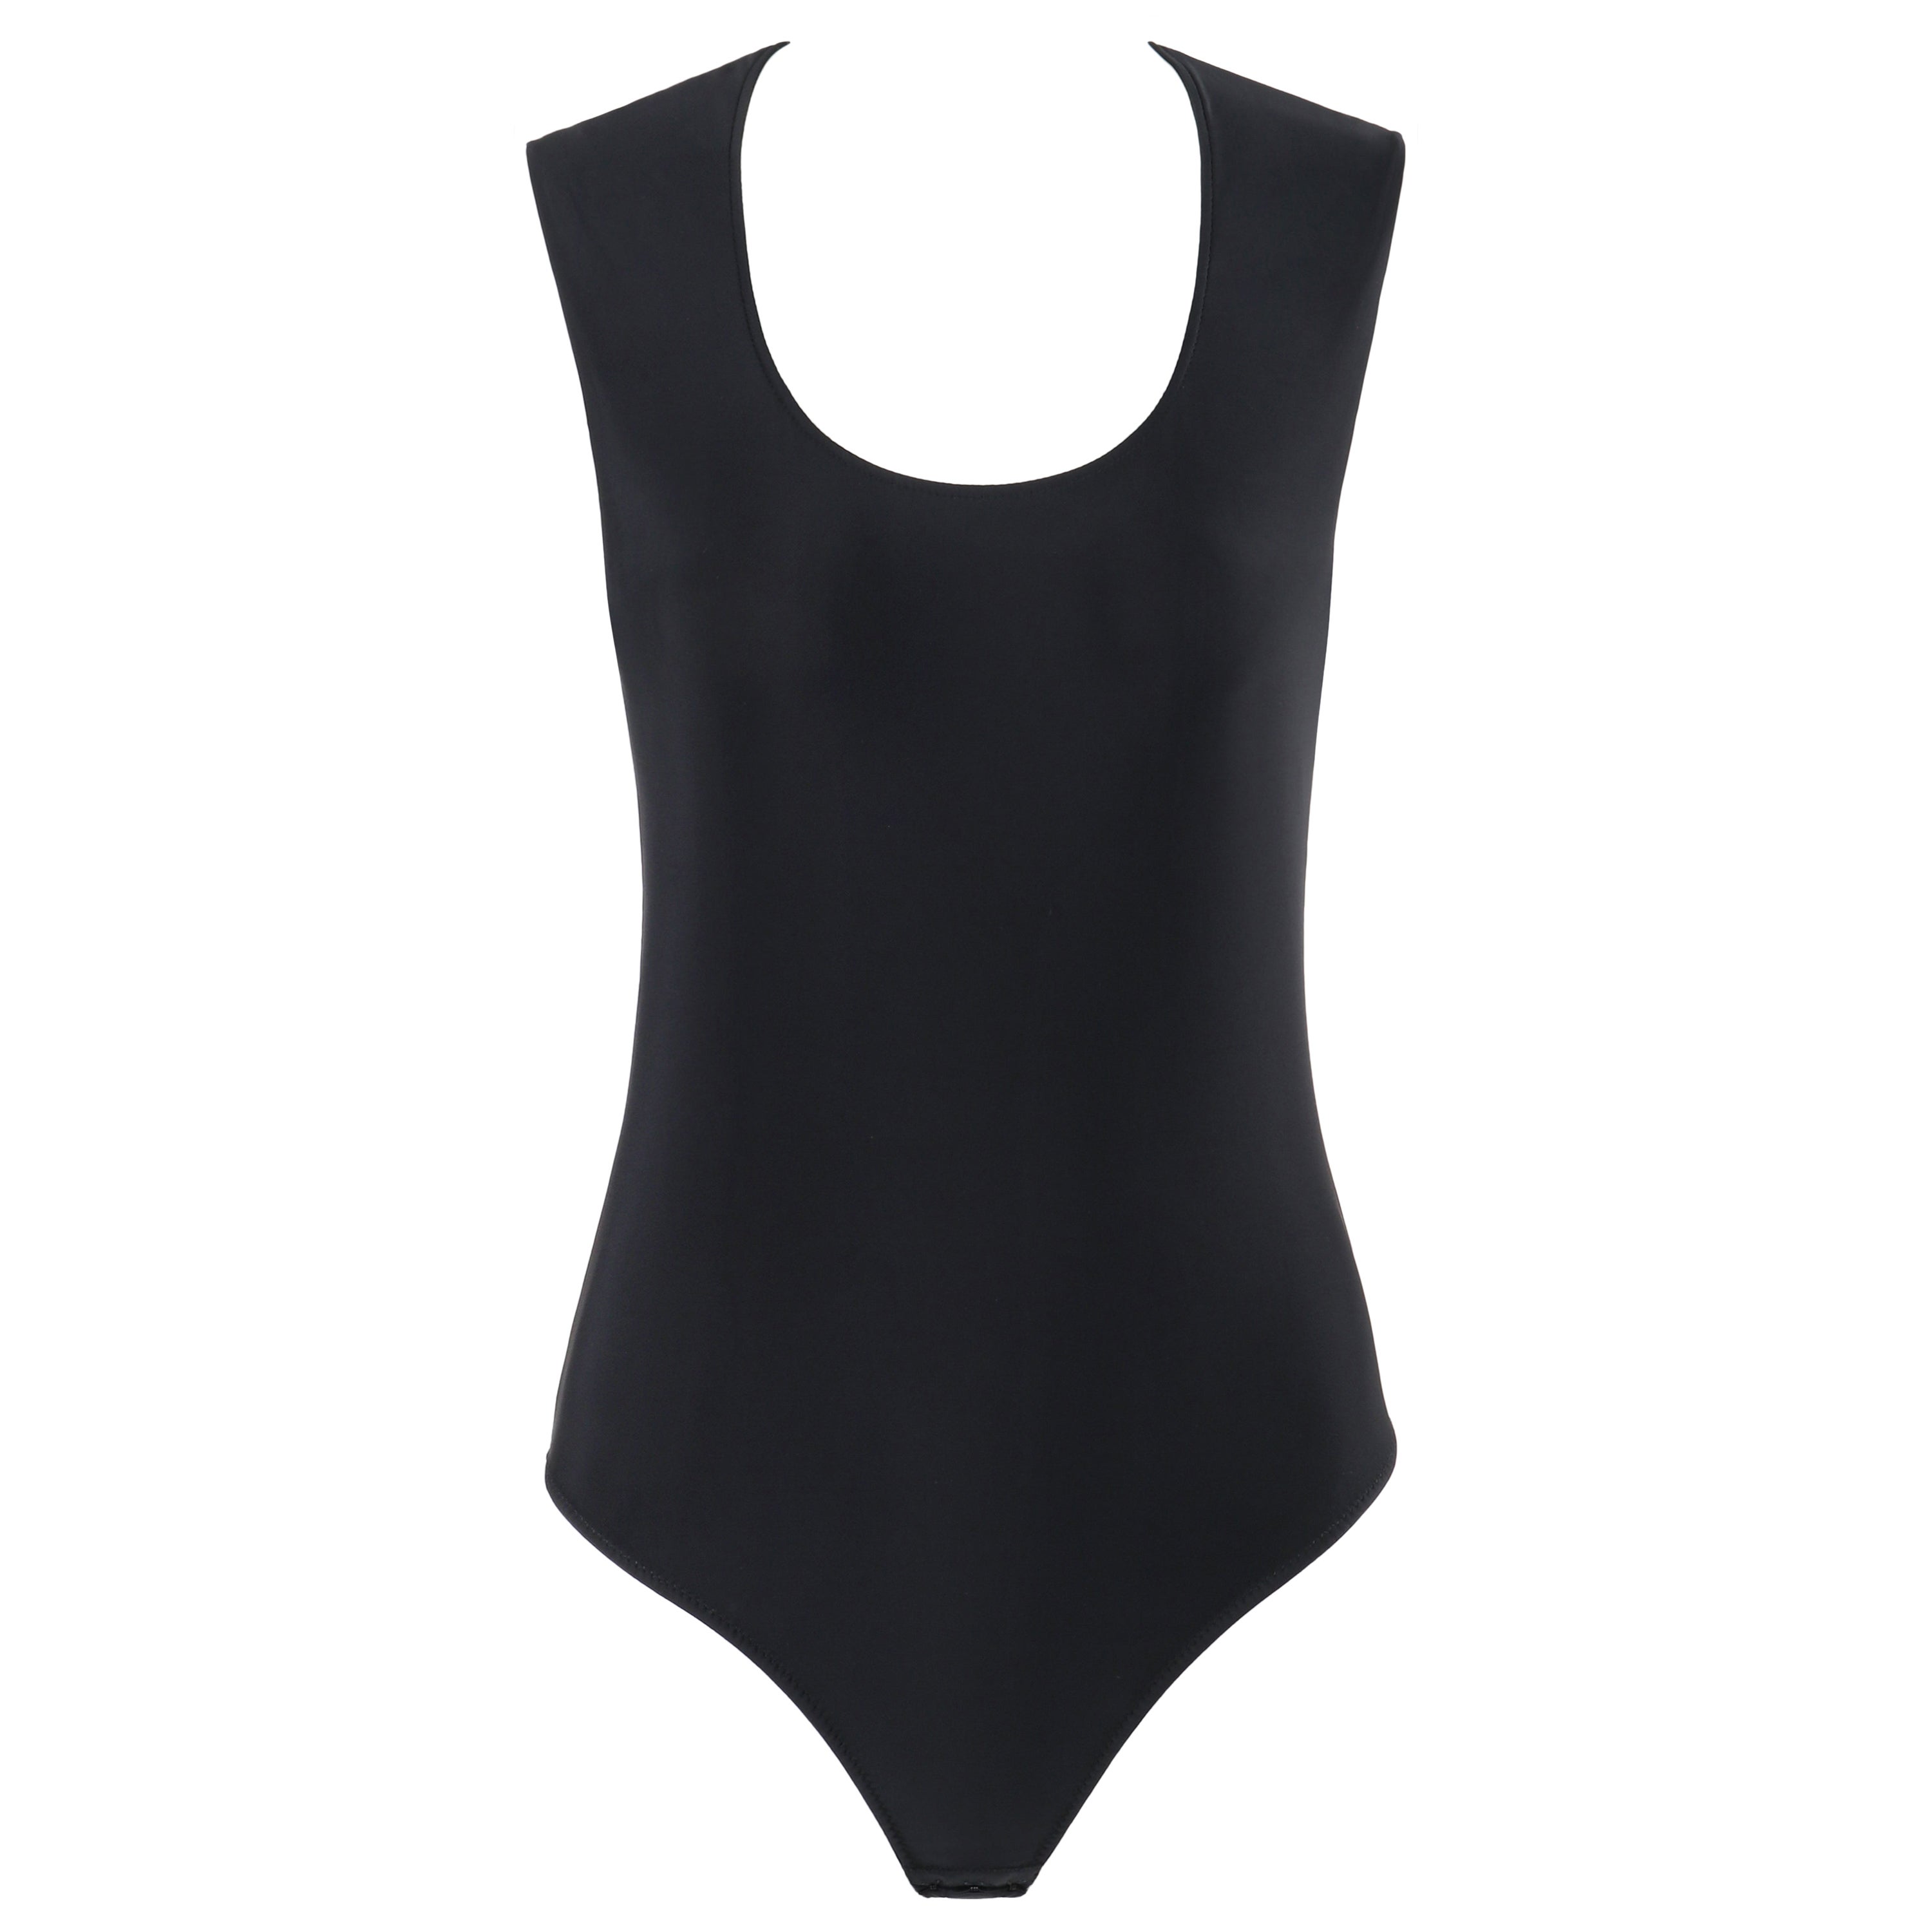 GIVENCHY COUTURE c.1998 ALEXANDER McQUEEN Black Stretch Scoop Neck Bodysuit For Sale